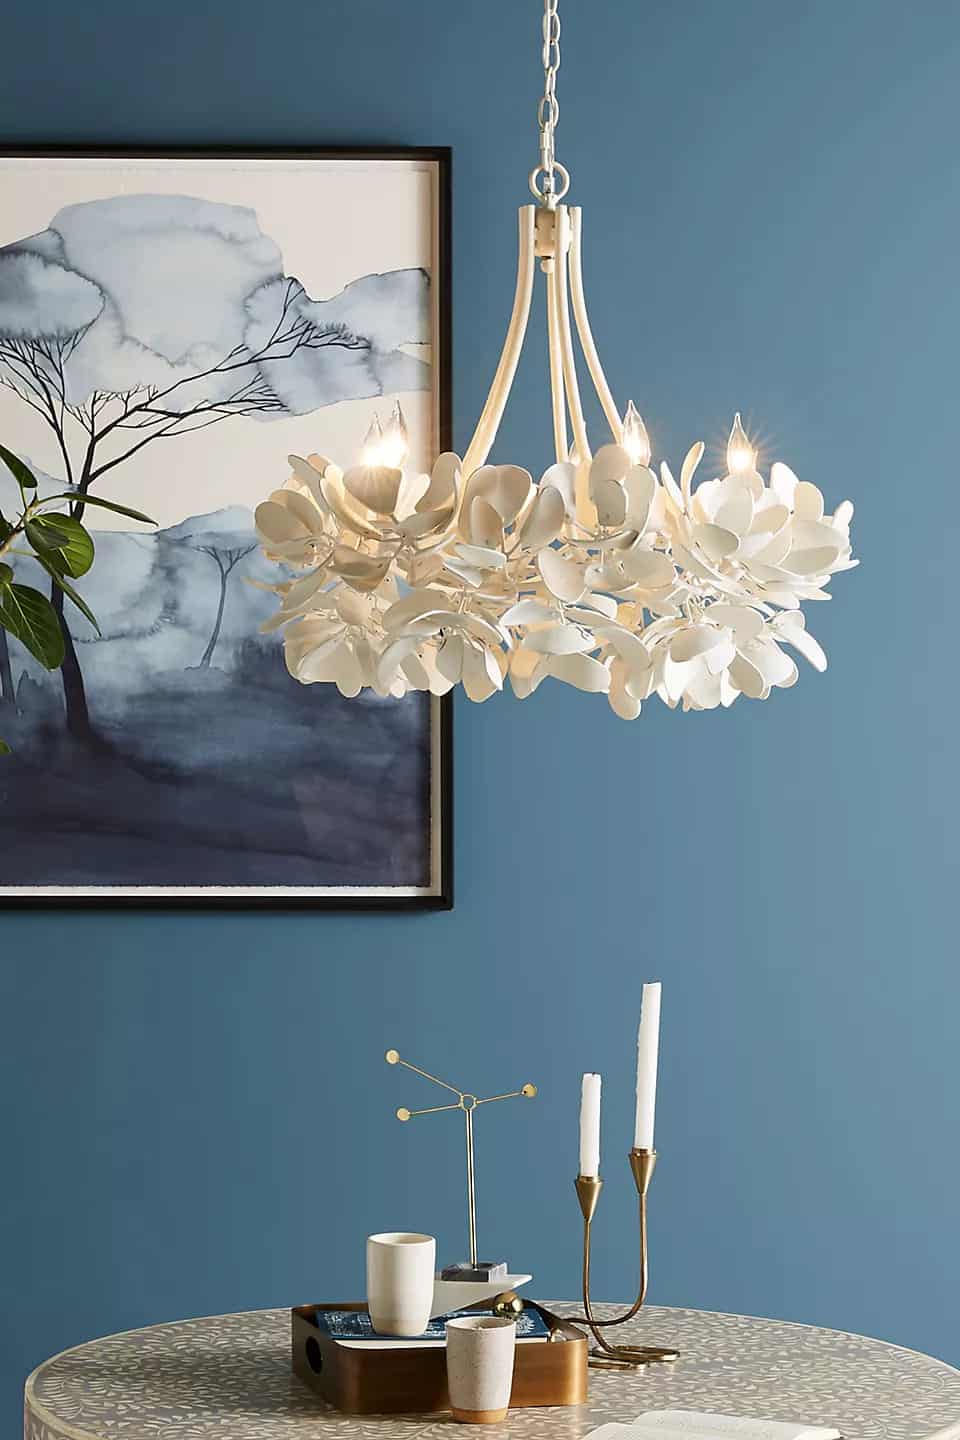 Go For A Standout Natural Touch With A Magnolia Chandelier